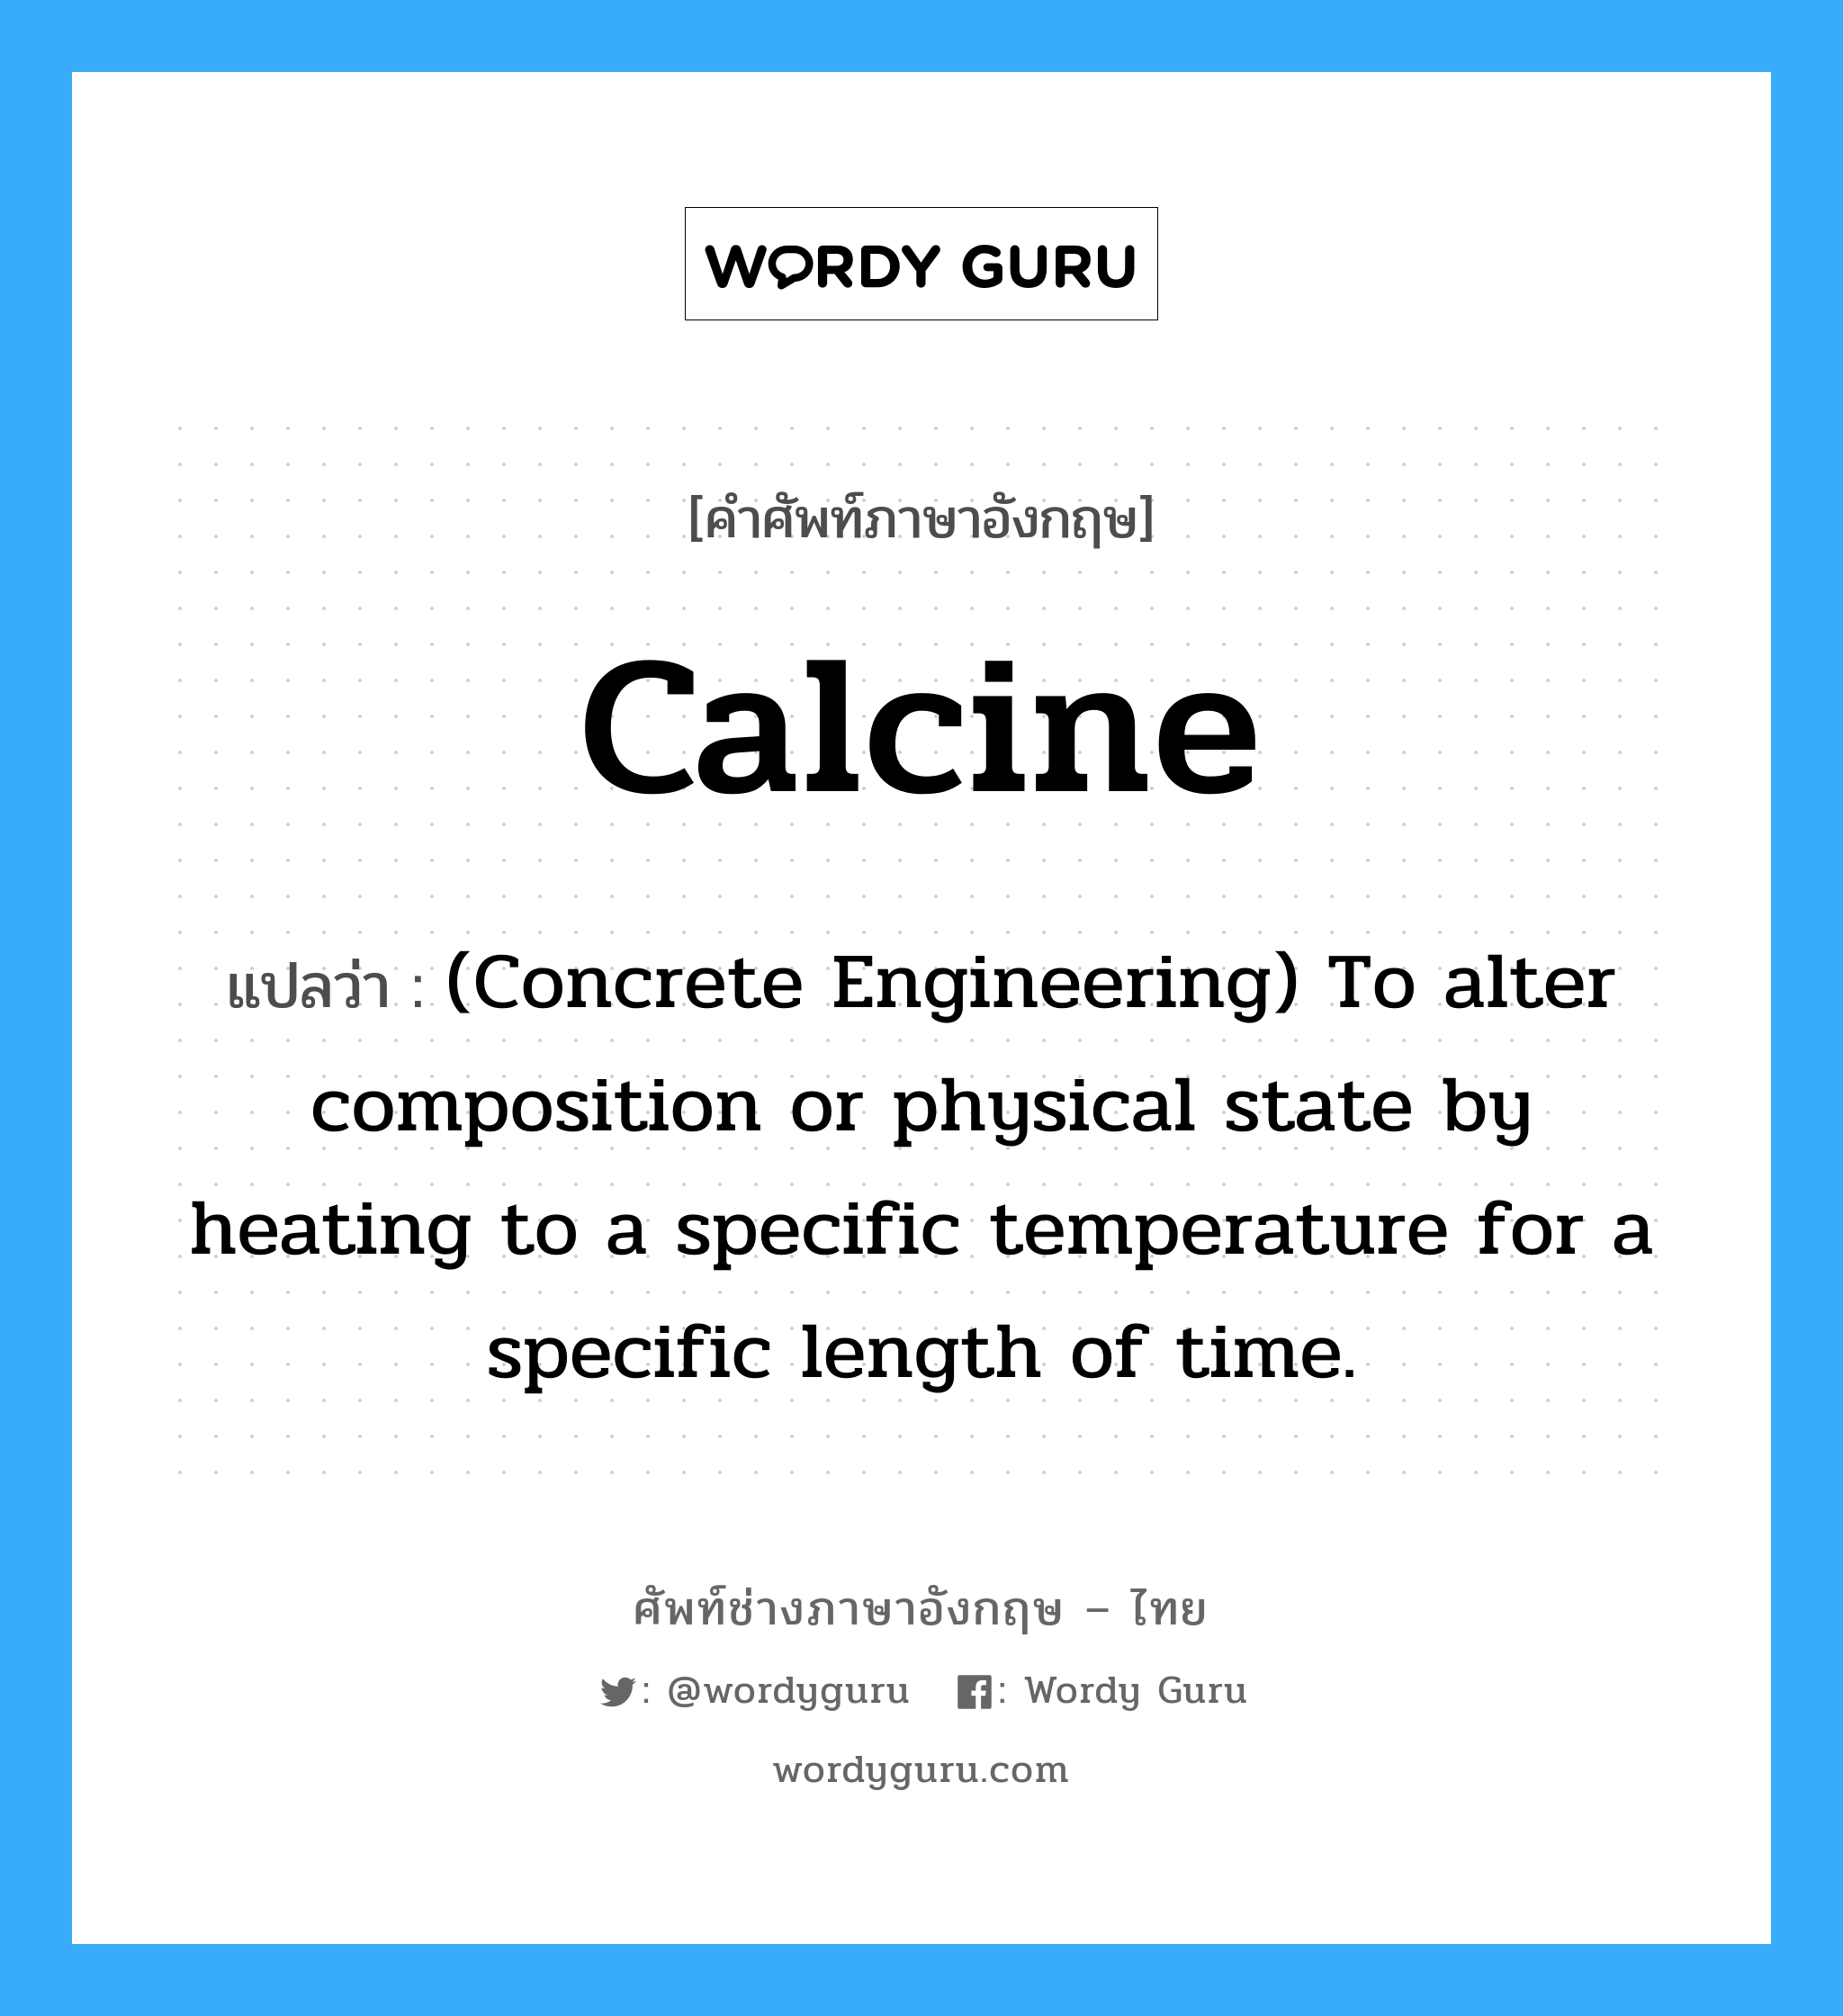 Calcine แปลว่า?, คำศัพท์ช่างภาษาอังกฤษ - ไทย Calcine คำศัพท์ภาษาอังกฤษ Calcine แปลว่า (Concrete Engineering) To alter composition or physical state by heating to a specific temperature for a specific length of time.